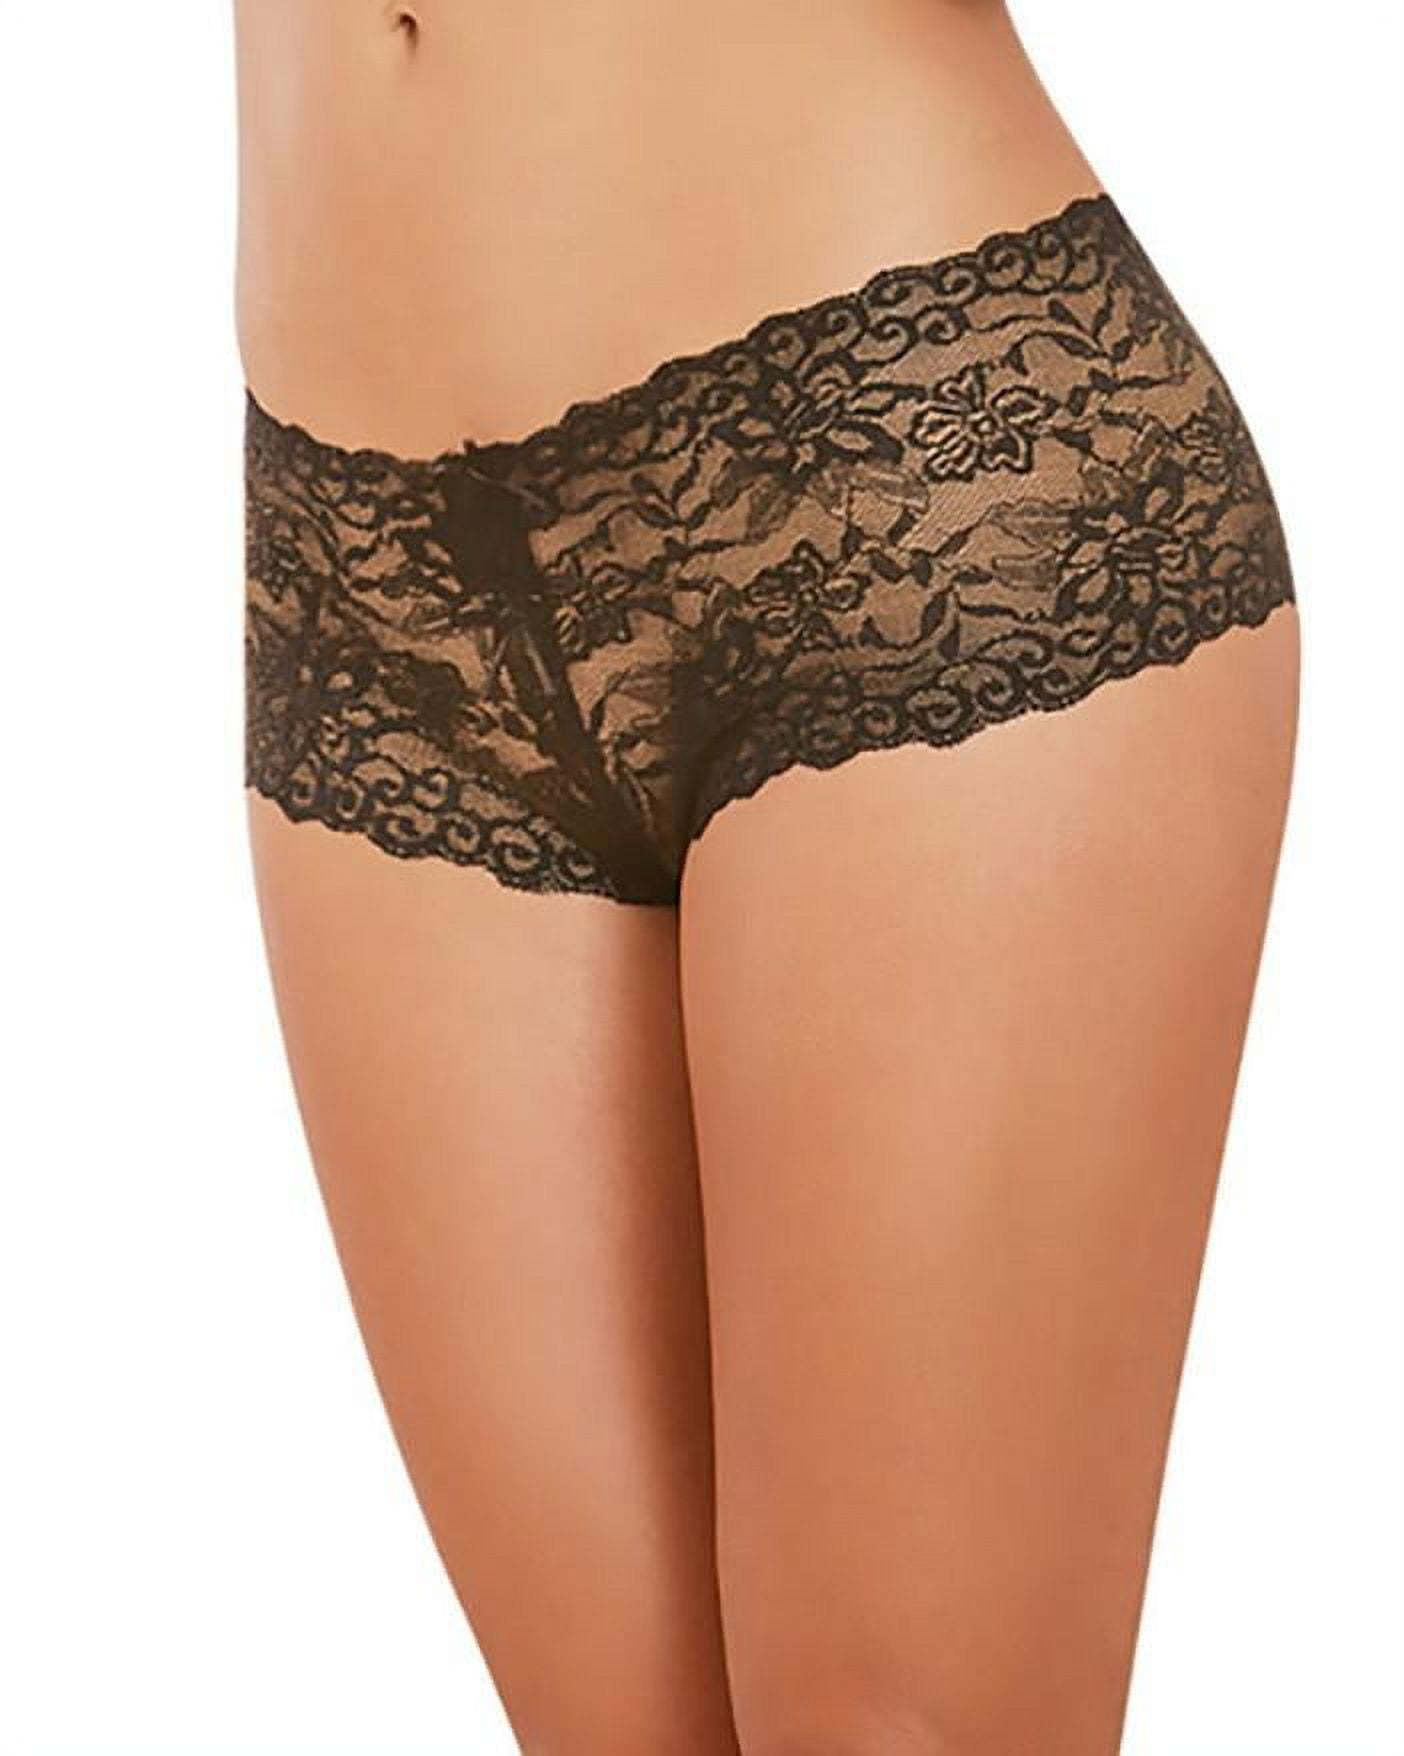 Boyshort Panties in Black Stretch Lace, Available Crotchless All